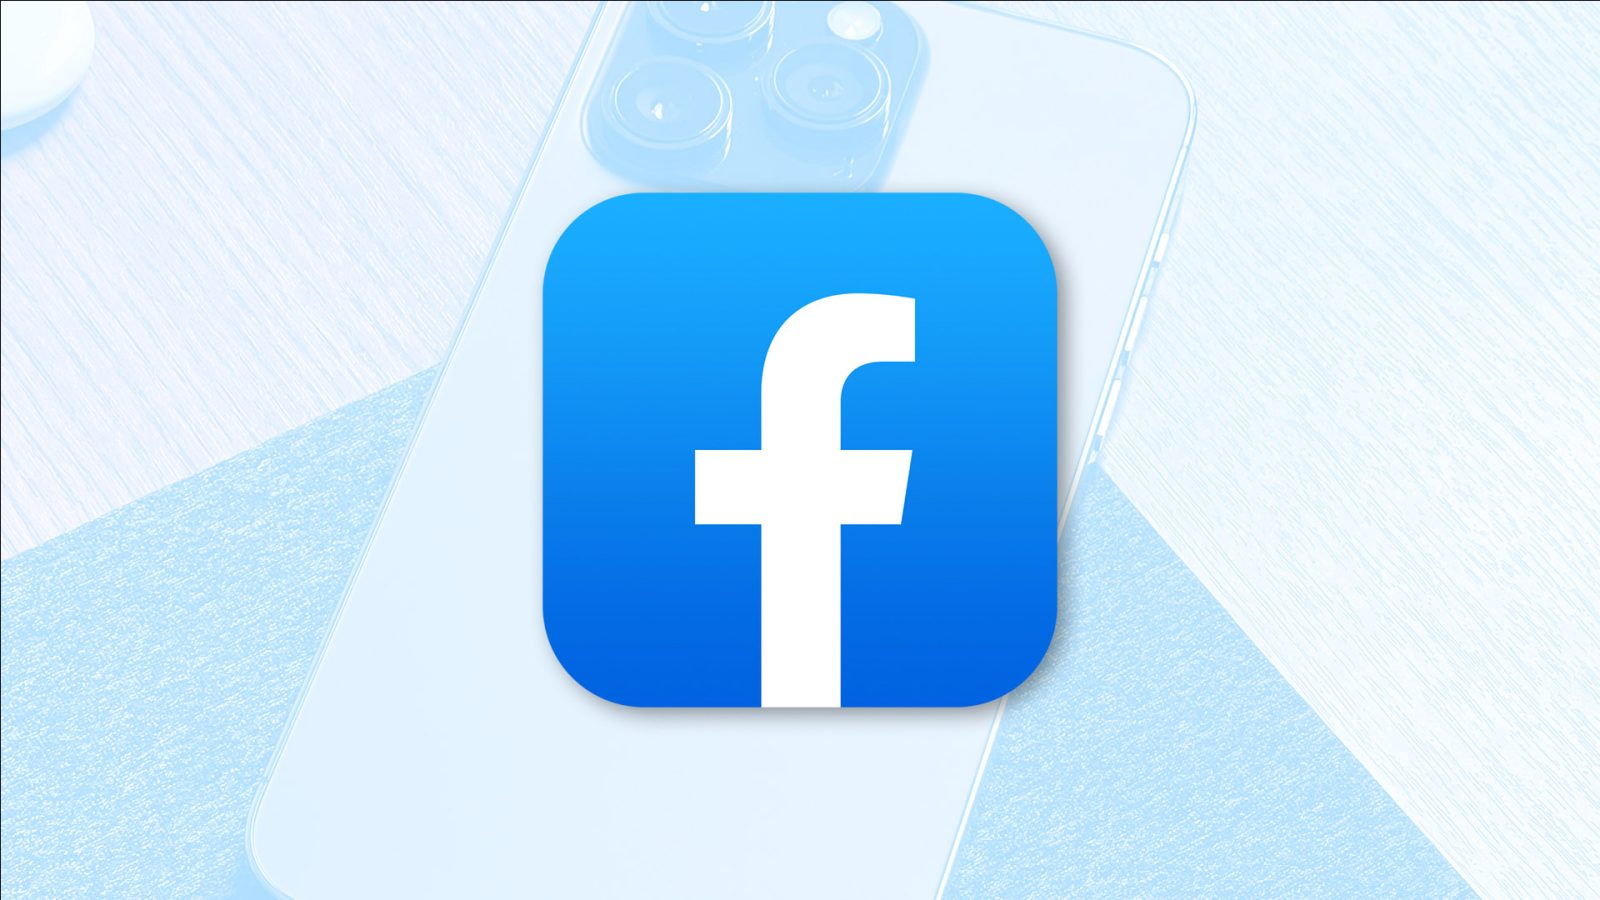 Meta wants to turn Facebook into an App Store replacement, at least in the EU